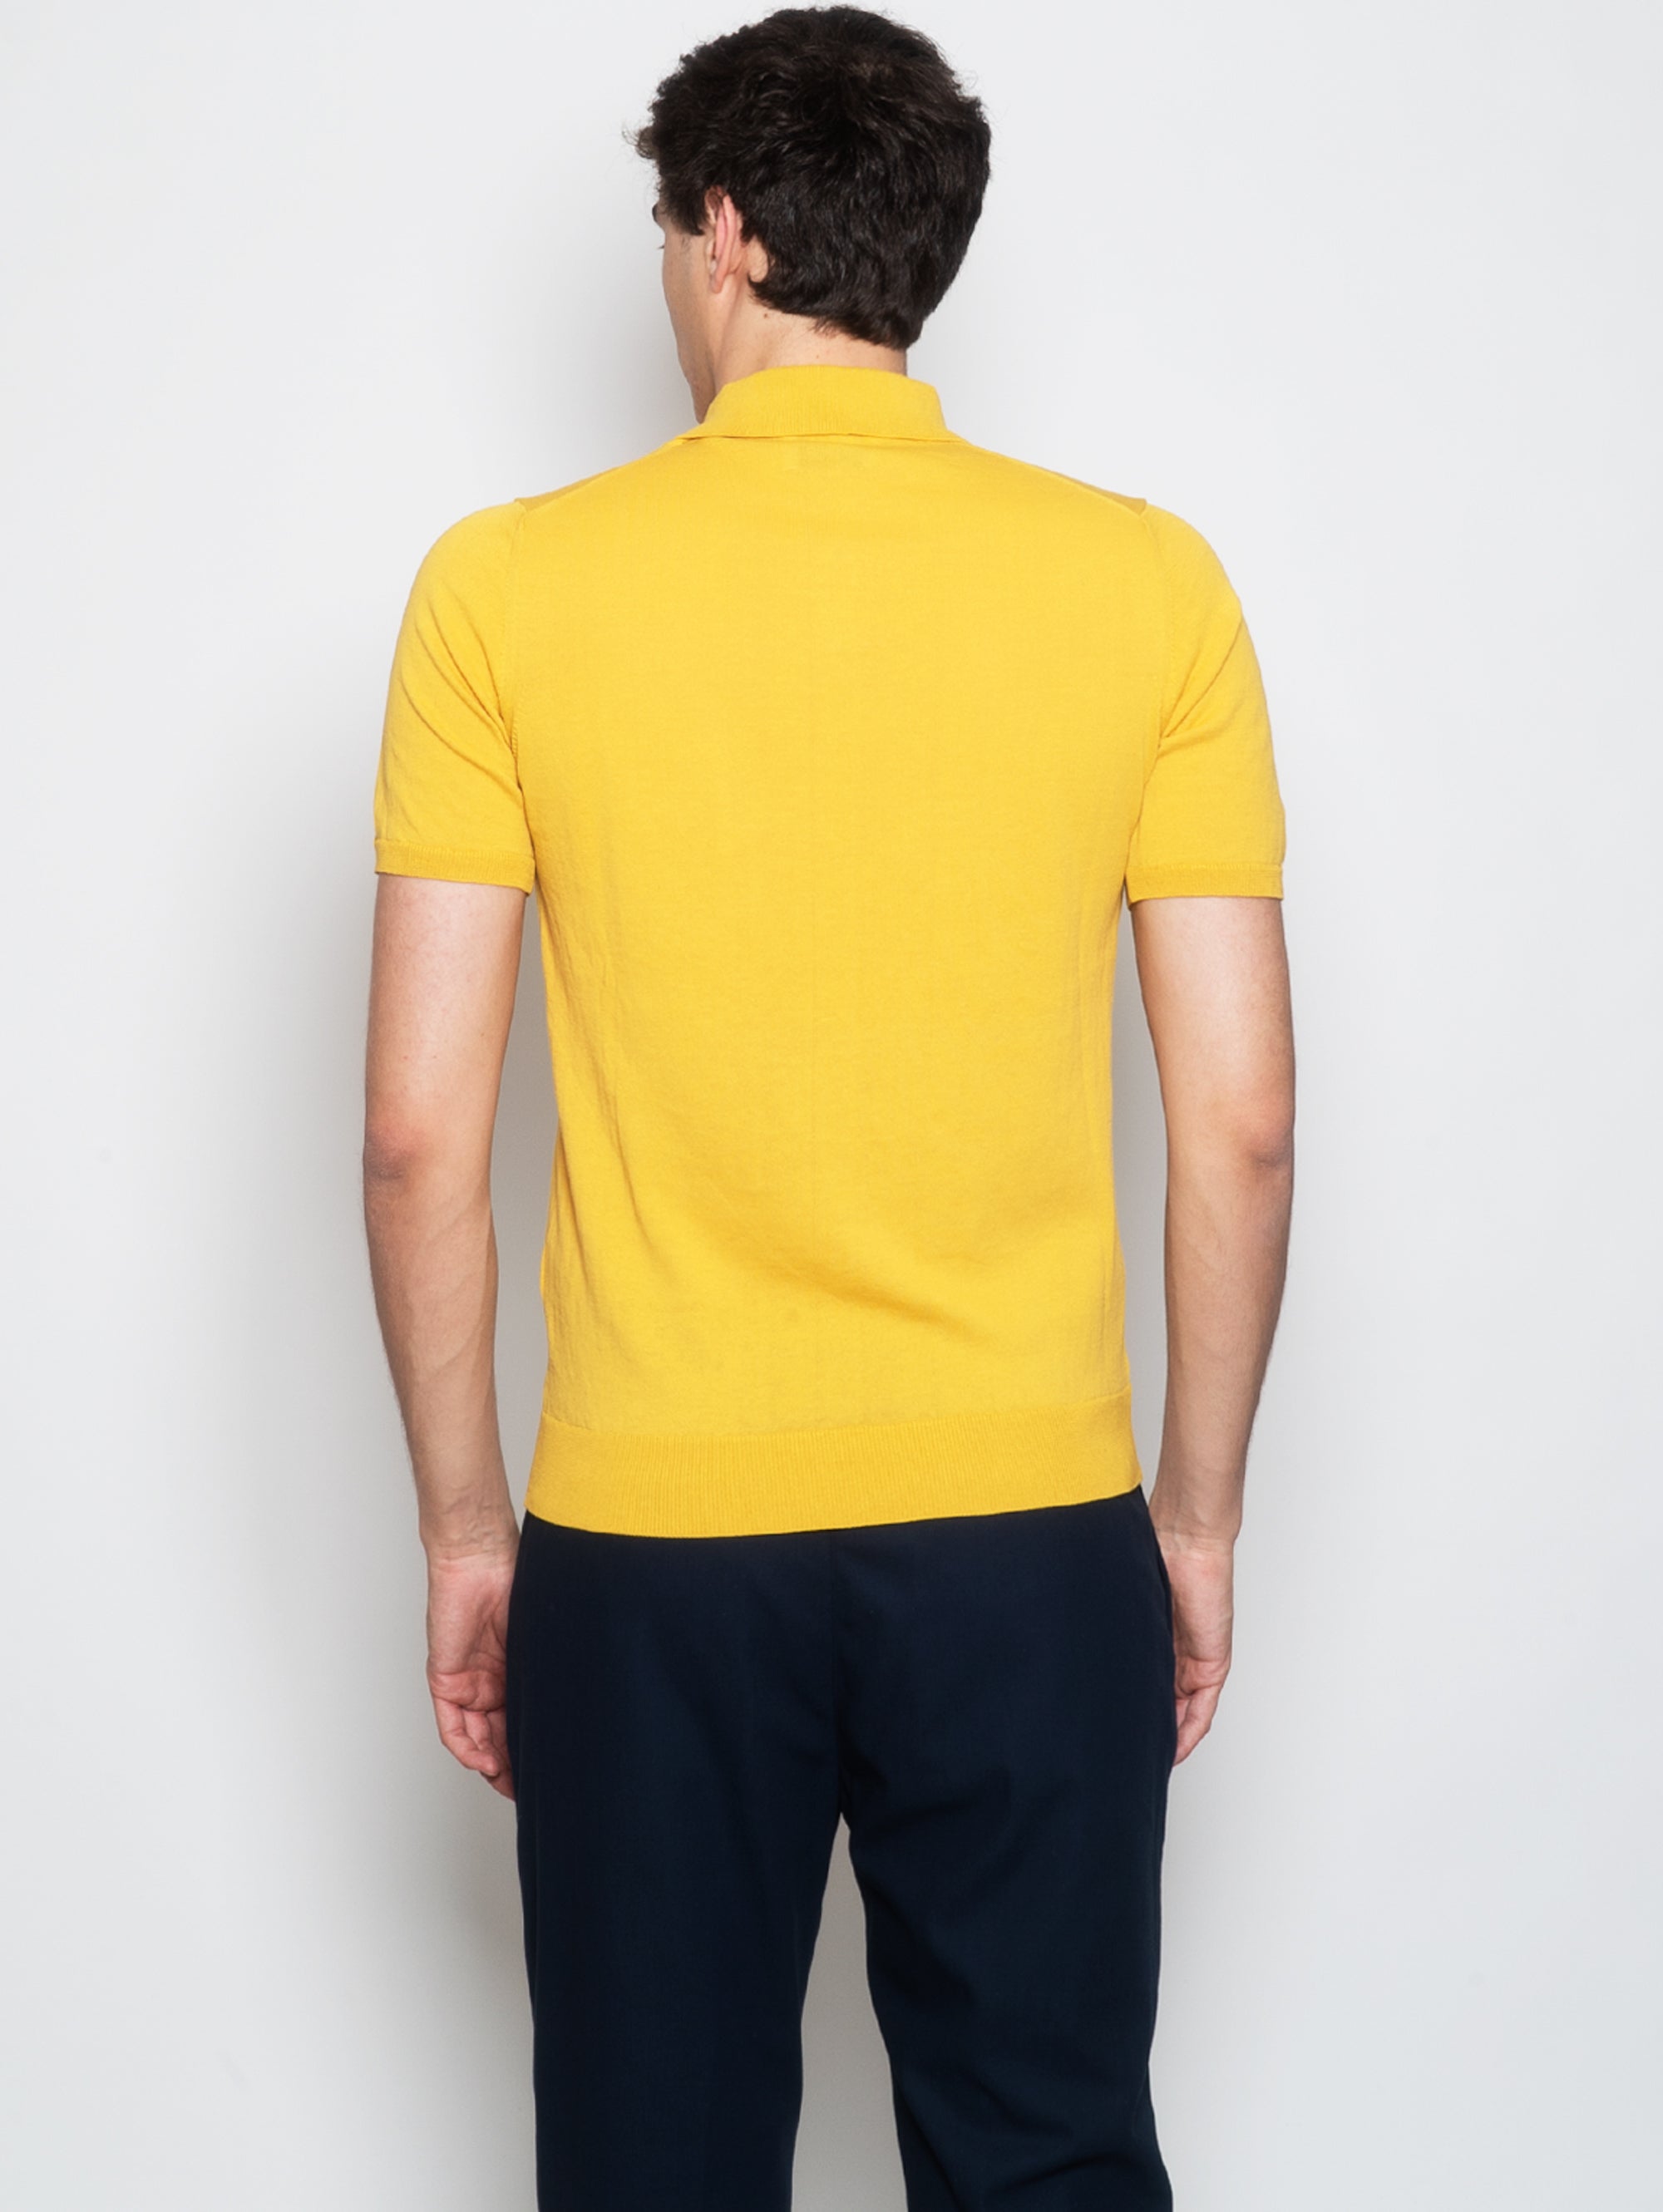 Sun Polo in Crepe Cotton Short Sleeves